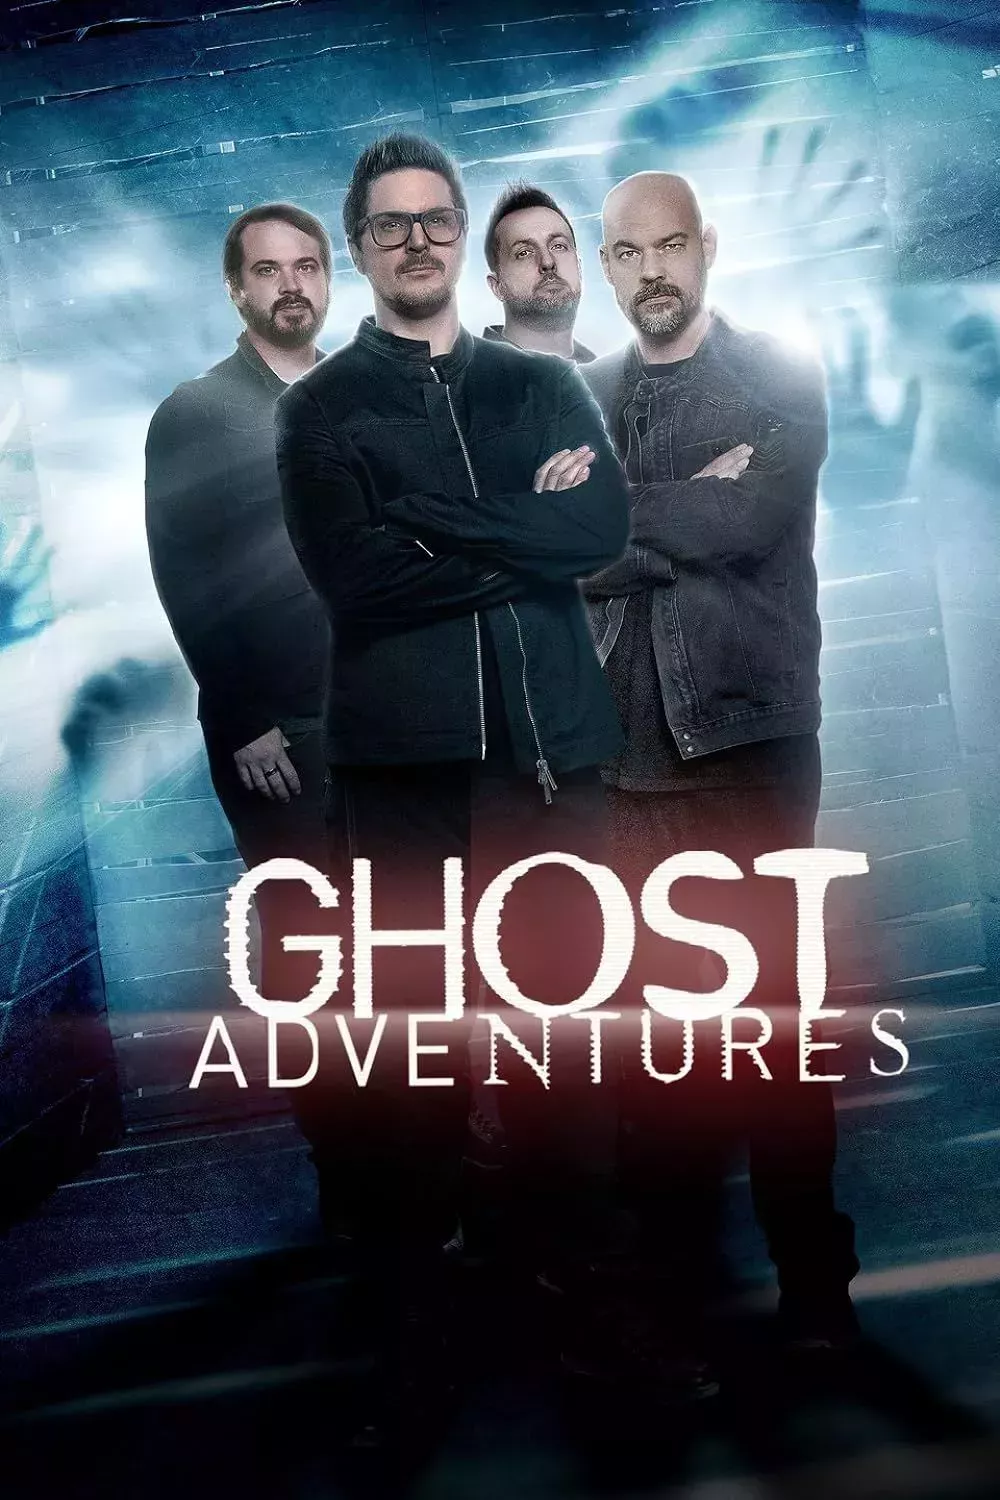 Promotional image for Ghost Adventures featuring Zak Bagans, Aaron Goodwin, Jay Wasley, and Billy Tolley